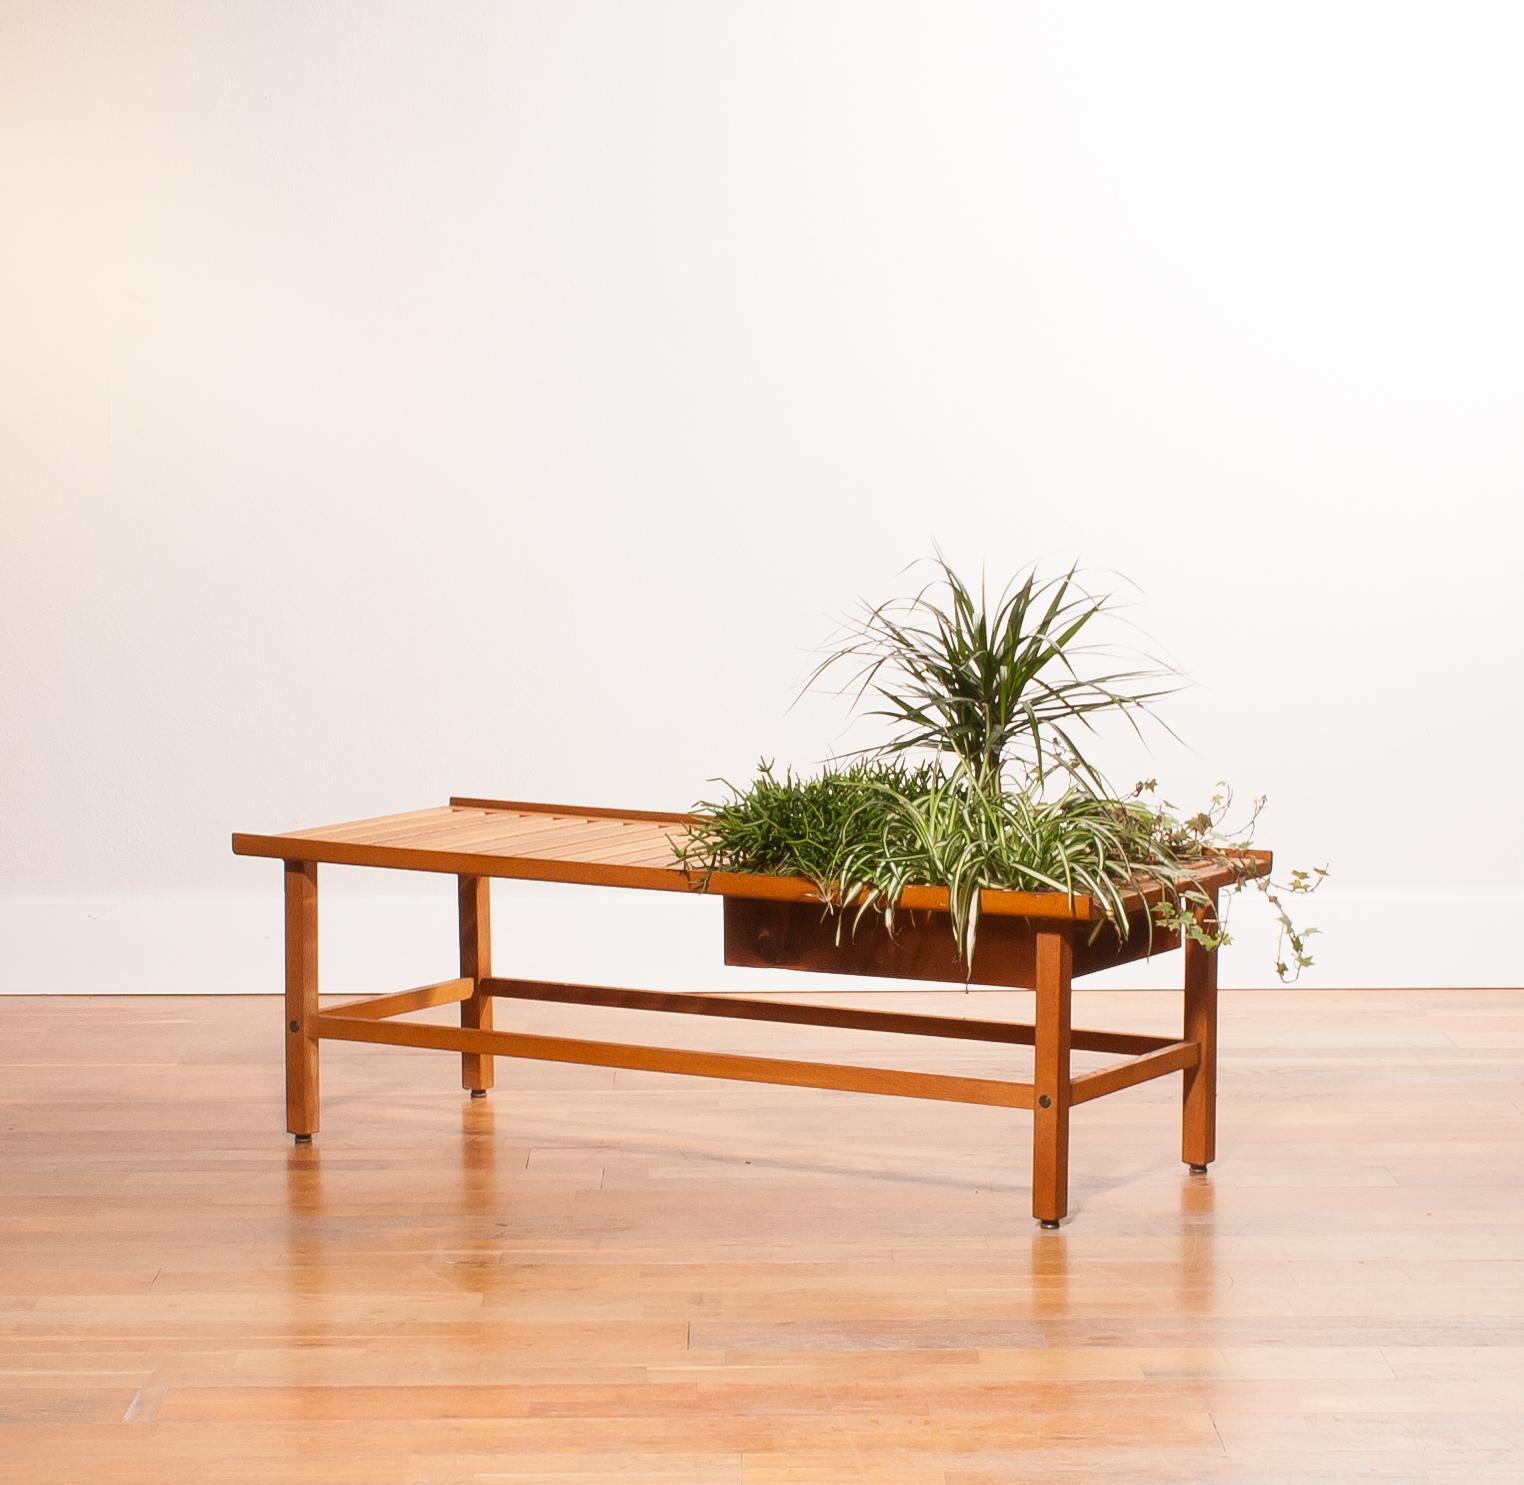 A beautiful plant bench designed by Yngve Ekström.
The bench is made of teak.
There is room for plants of flowers in the copper compartment.
It is in an excellent condition.
Period 1950s
Dimensions: H 39 cm, D 48 cm, W 120 cm.